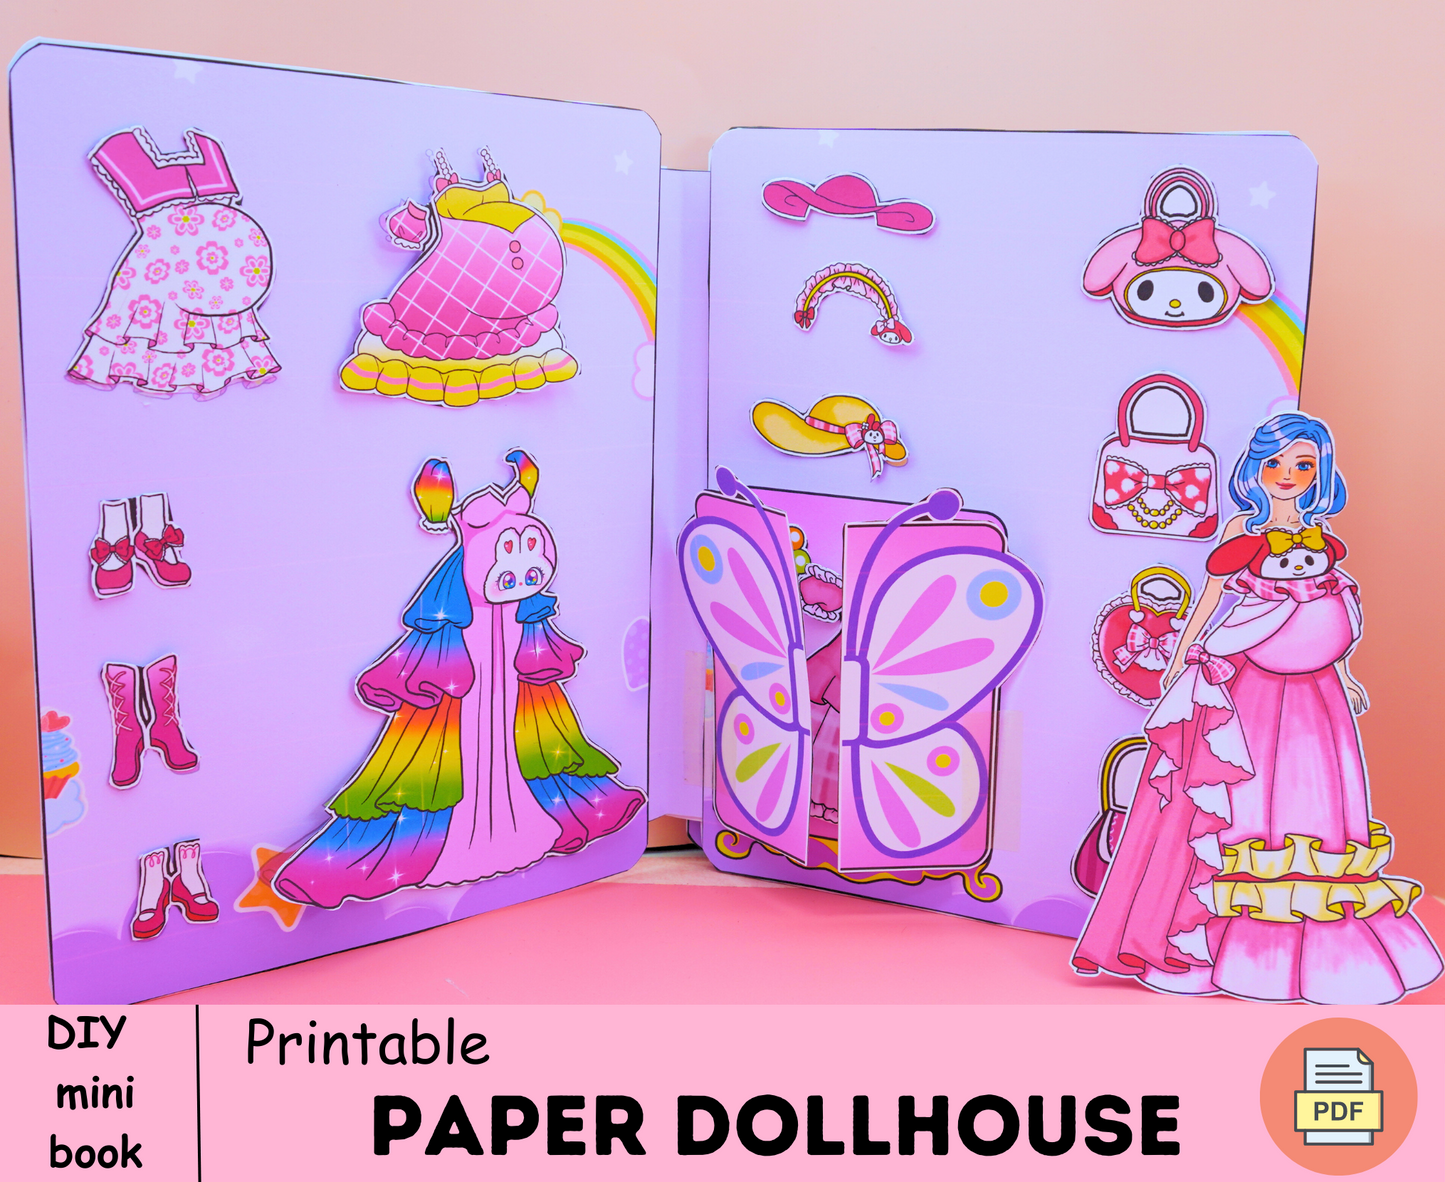 Pinky Closet for Mommy barbie paper doll printables 🌈 Sweet handmade dress for paper doll | Easy busy book for toddler print  🦄 Woa Doll Crafts